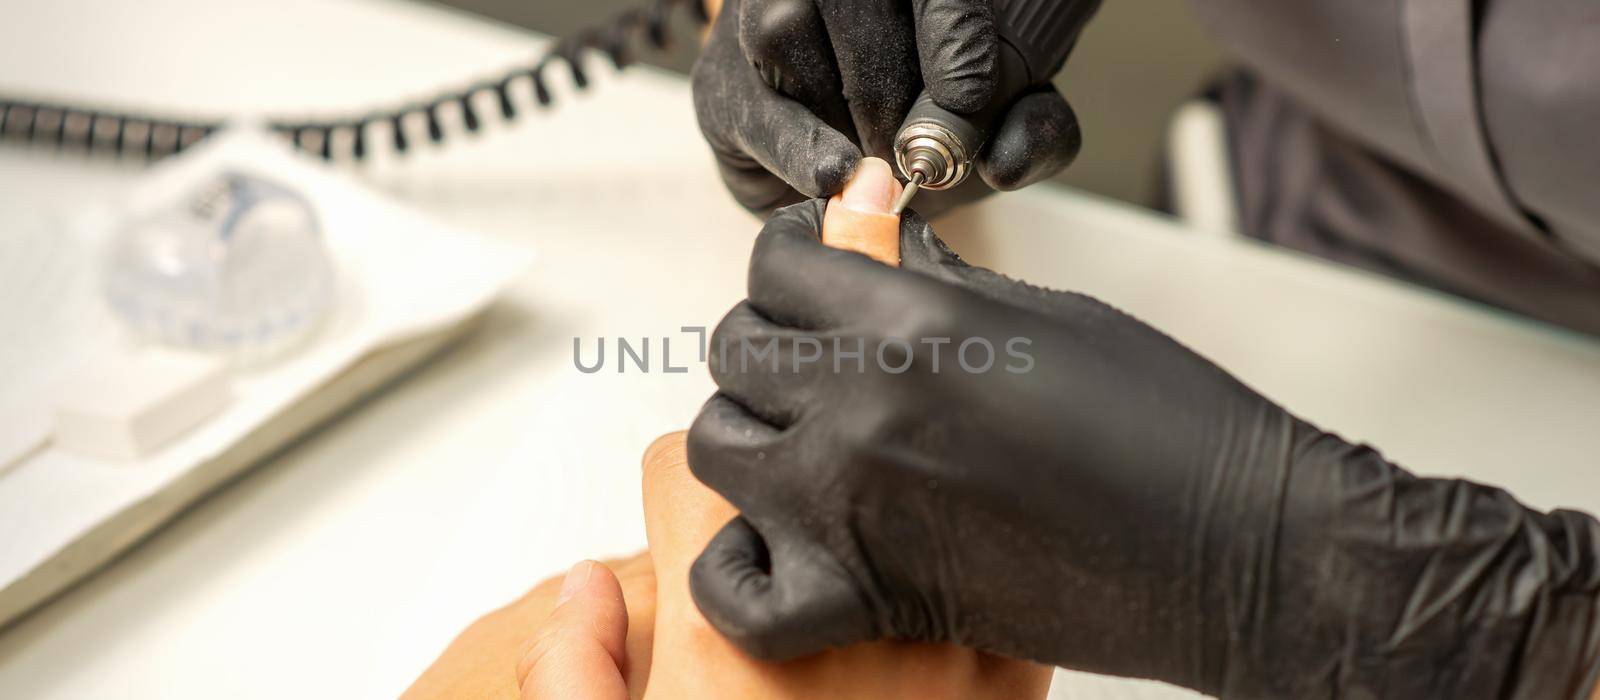 Manicure master uses electric nail file machine in a nail salon, close up